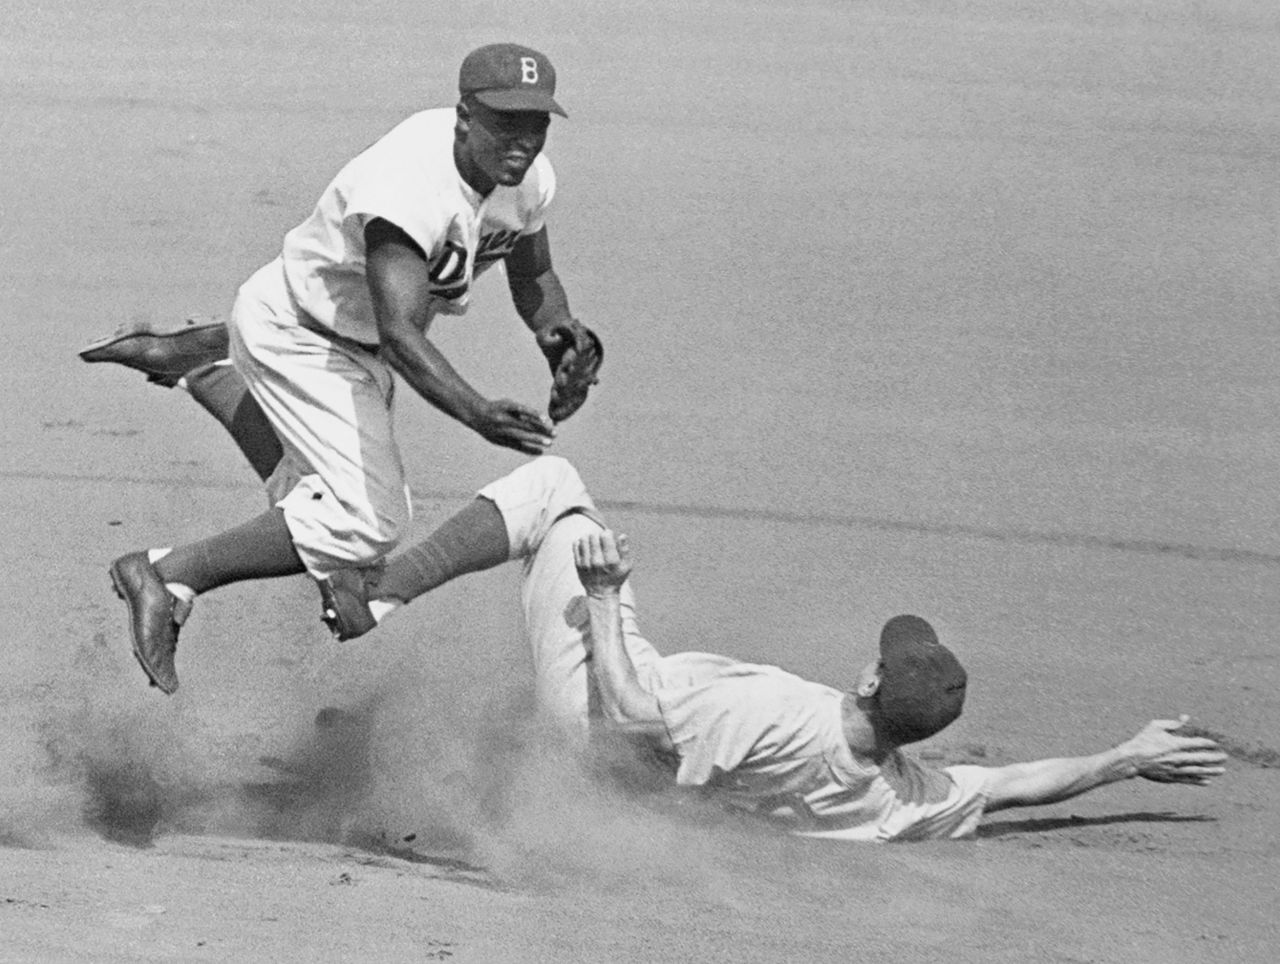 Robinson leaps into the air to try to turn a double play in 1952.